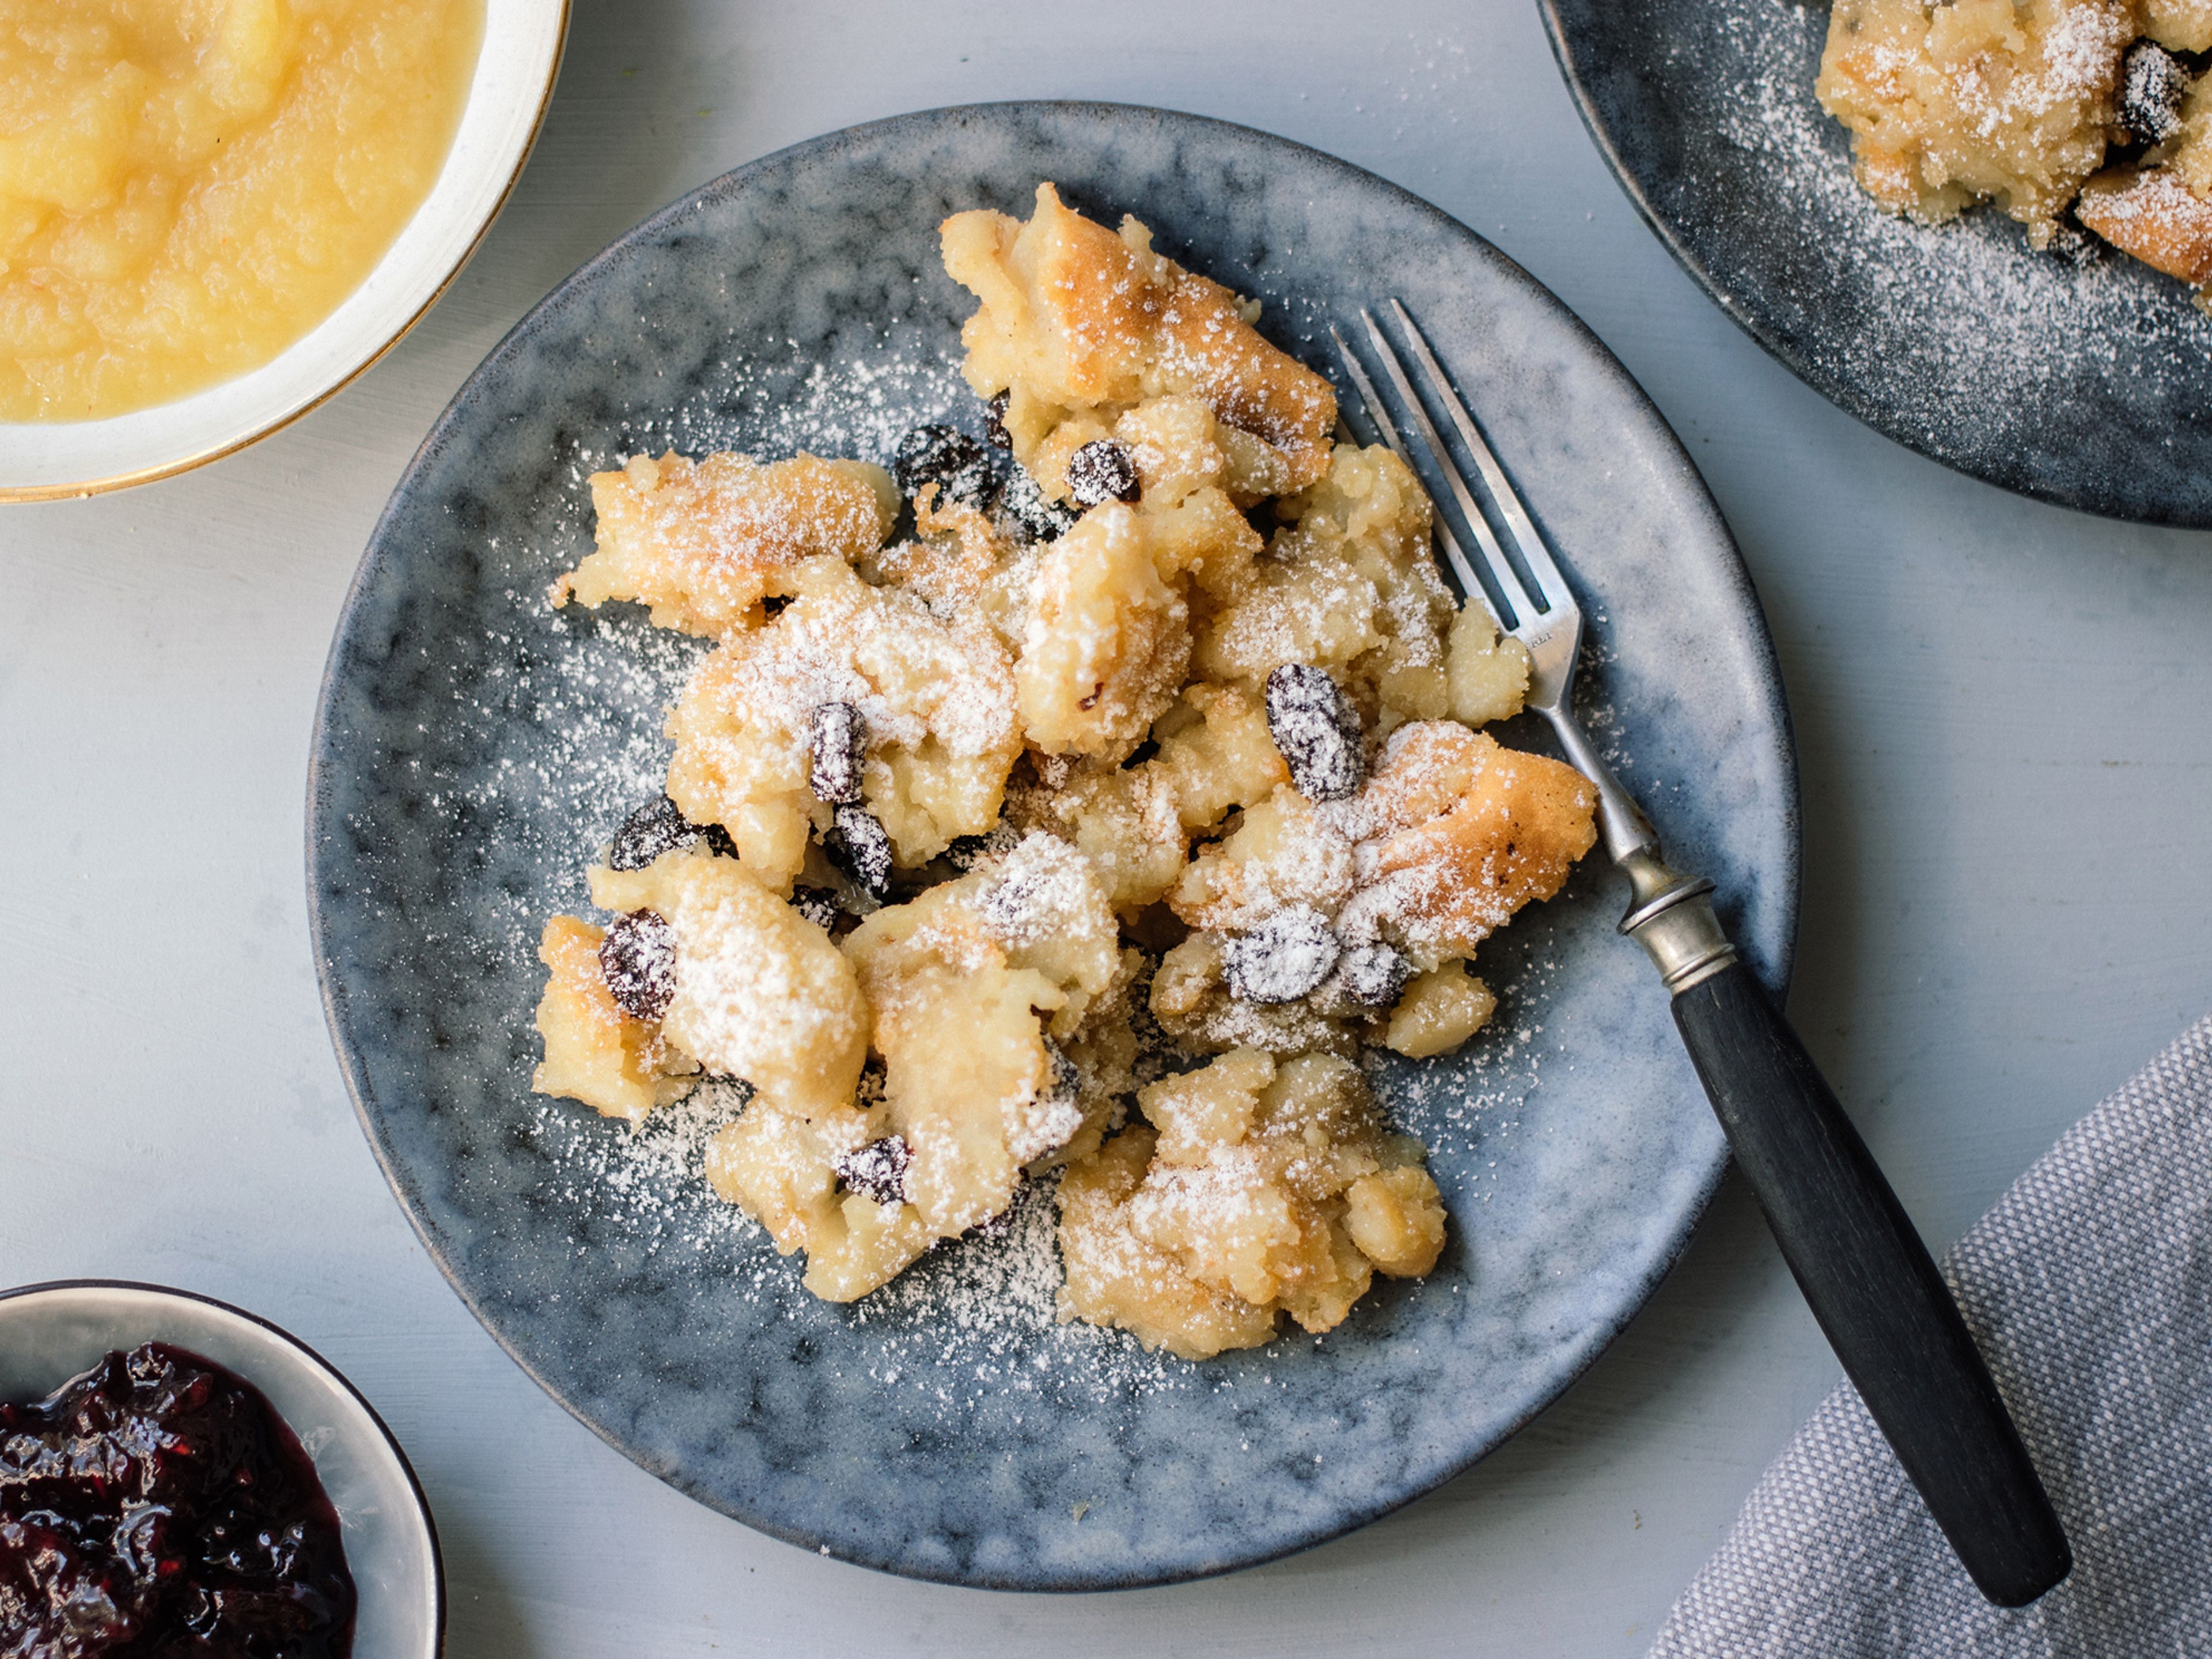 Dust vegan Kaiserschmarrn with confectioner's sugar and serve just like that, or with jam or apple purée. Enjoy!